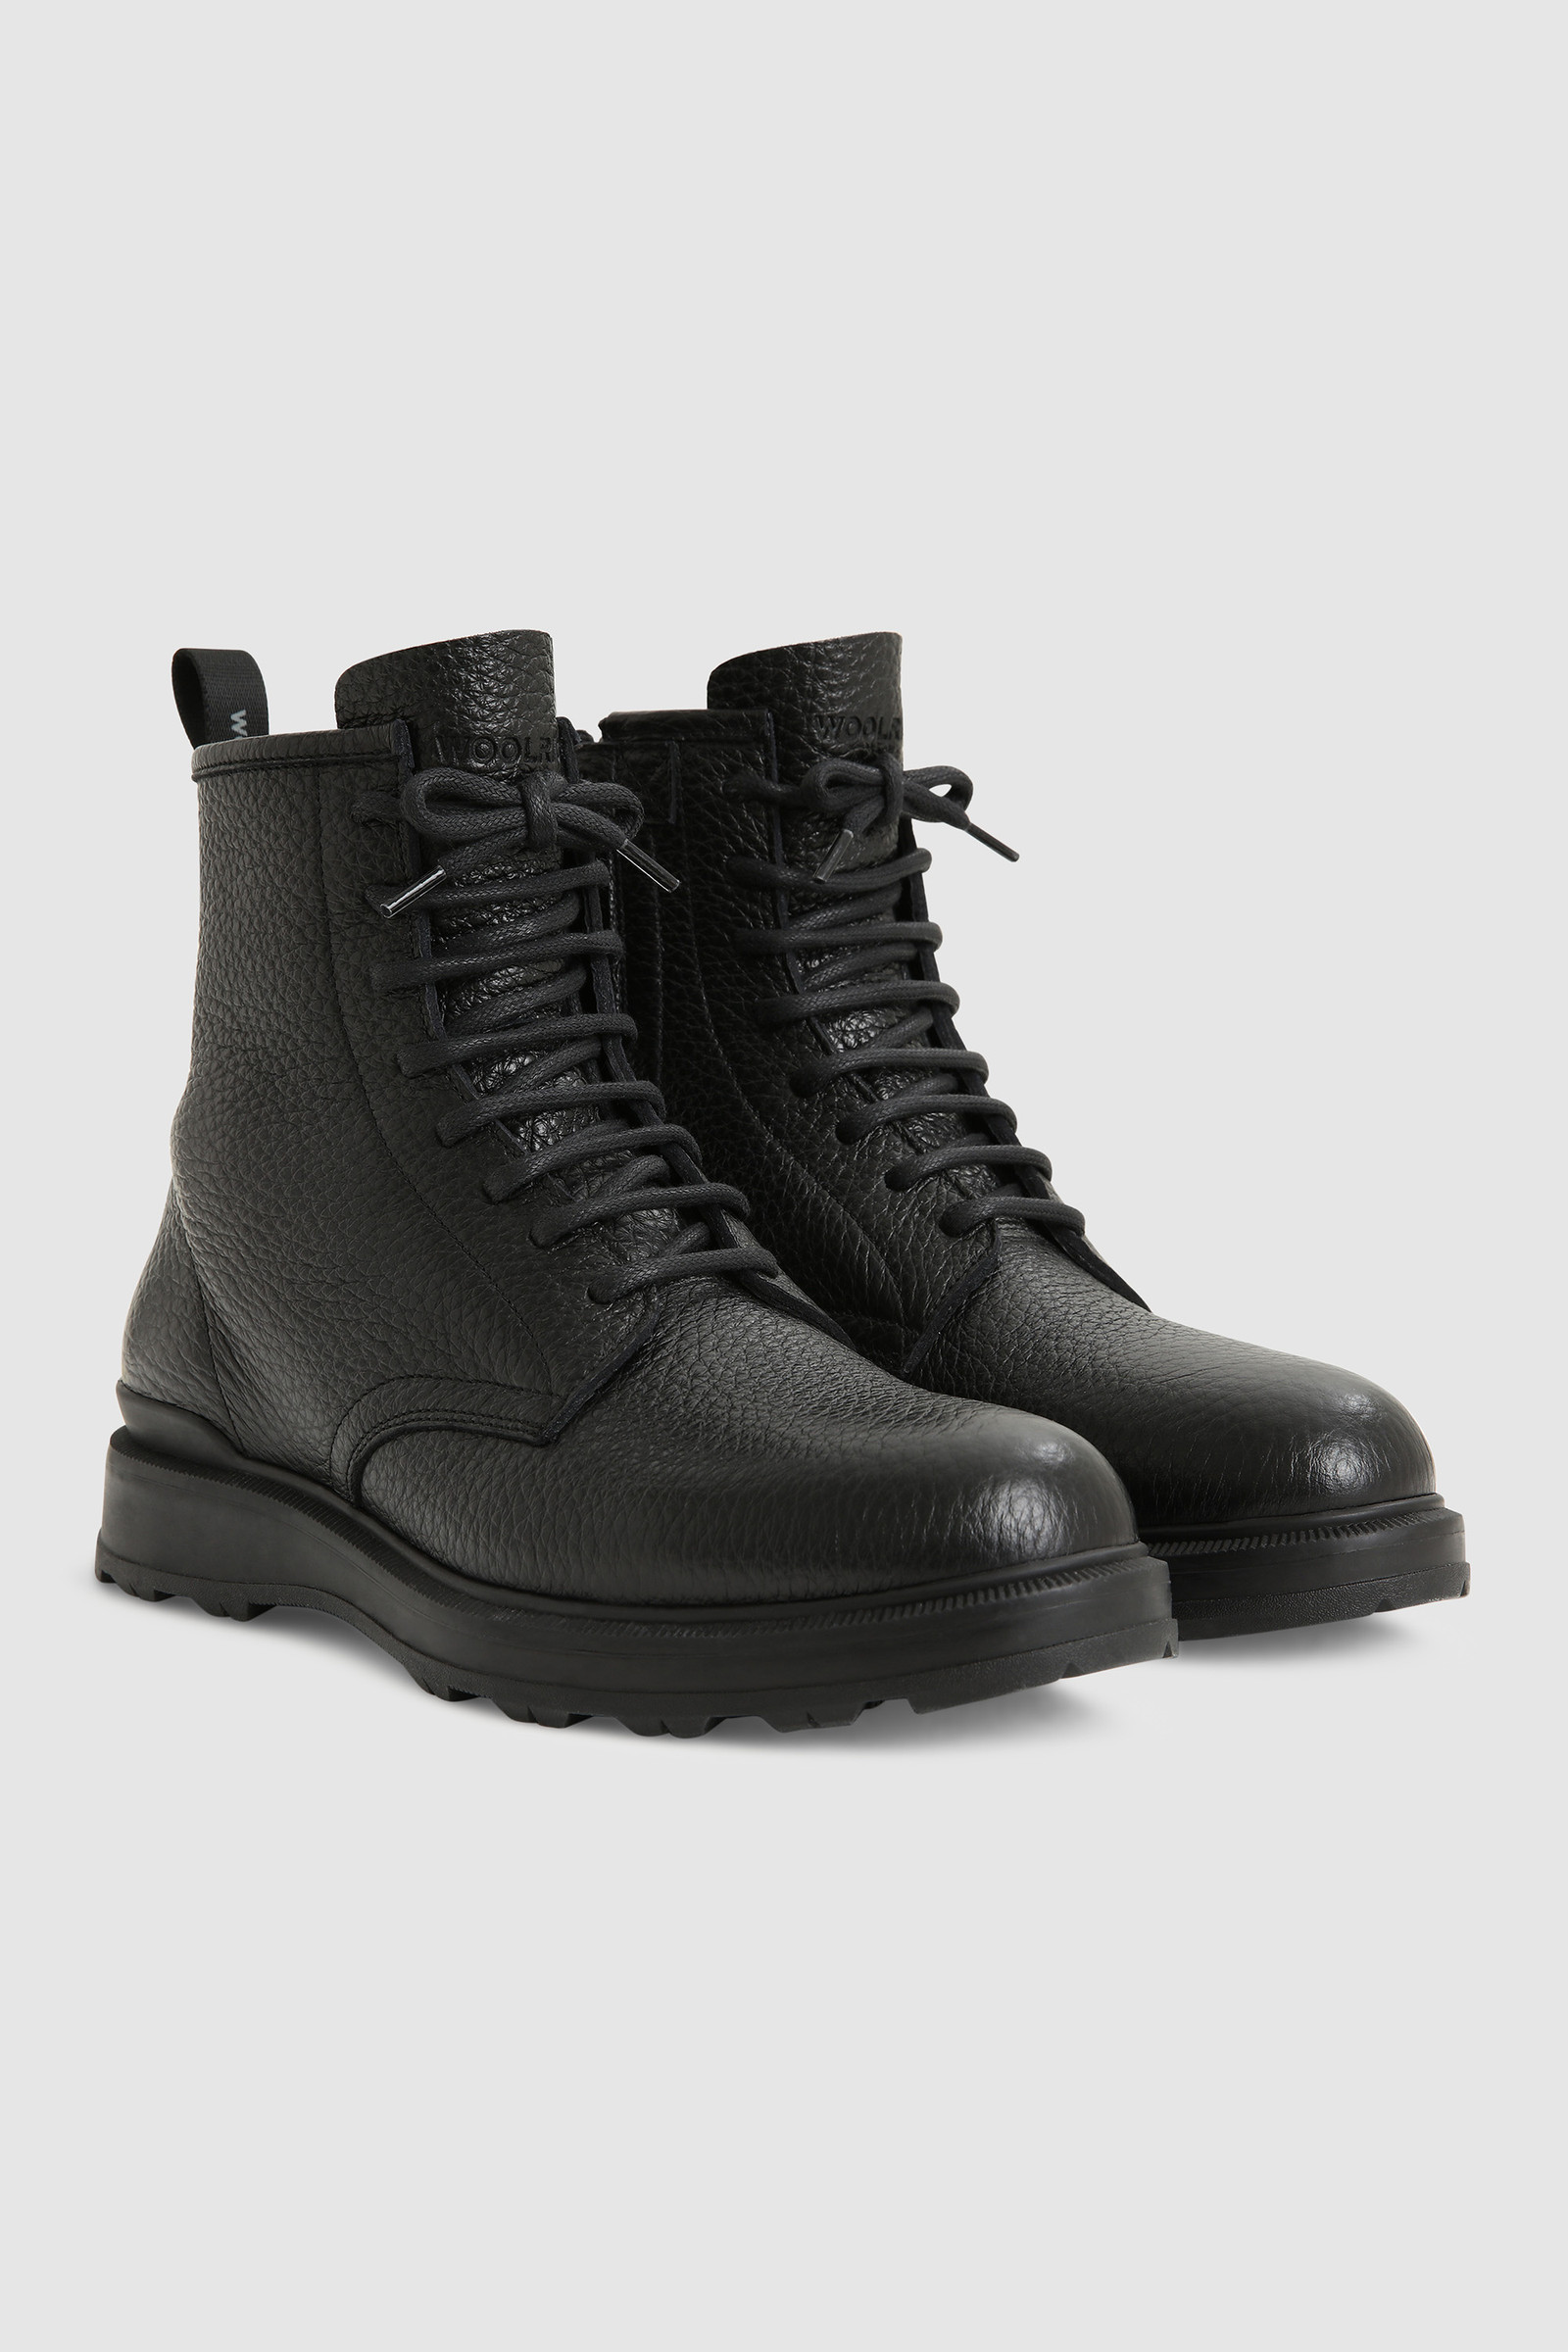 Woolrich Leather Boots in Black for Men Mens Boots Woolrich Boots 